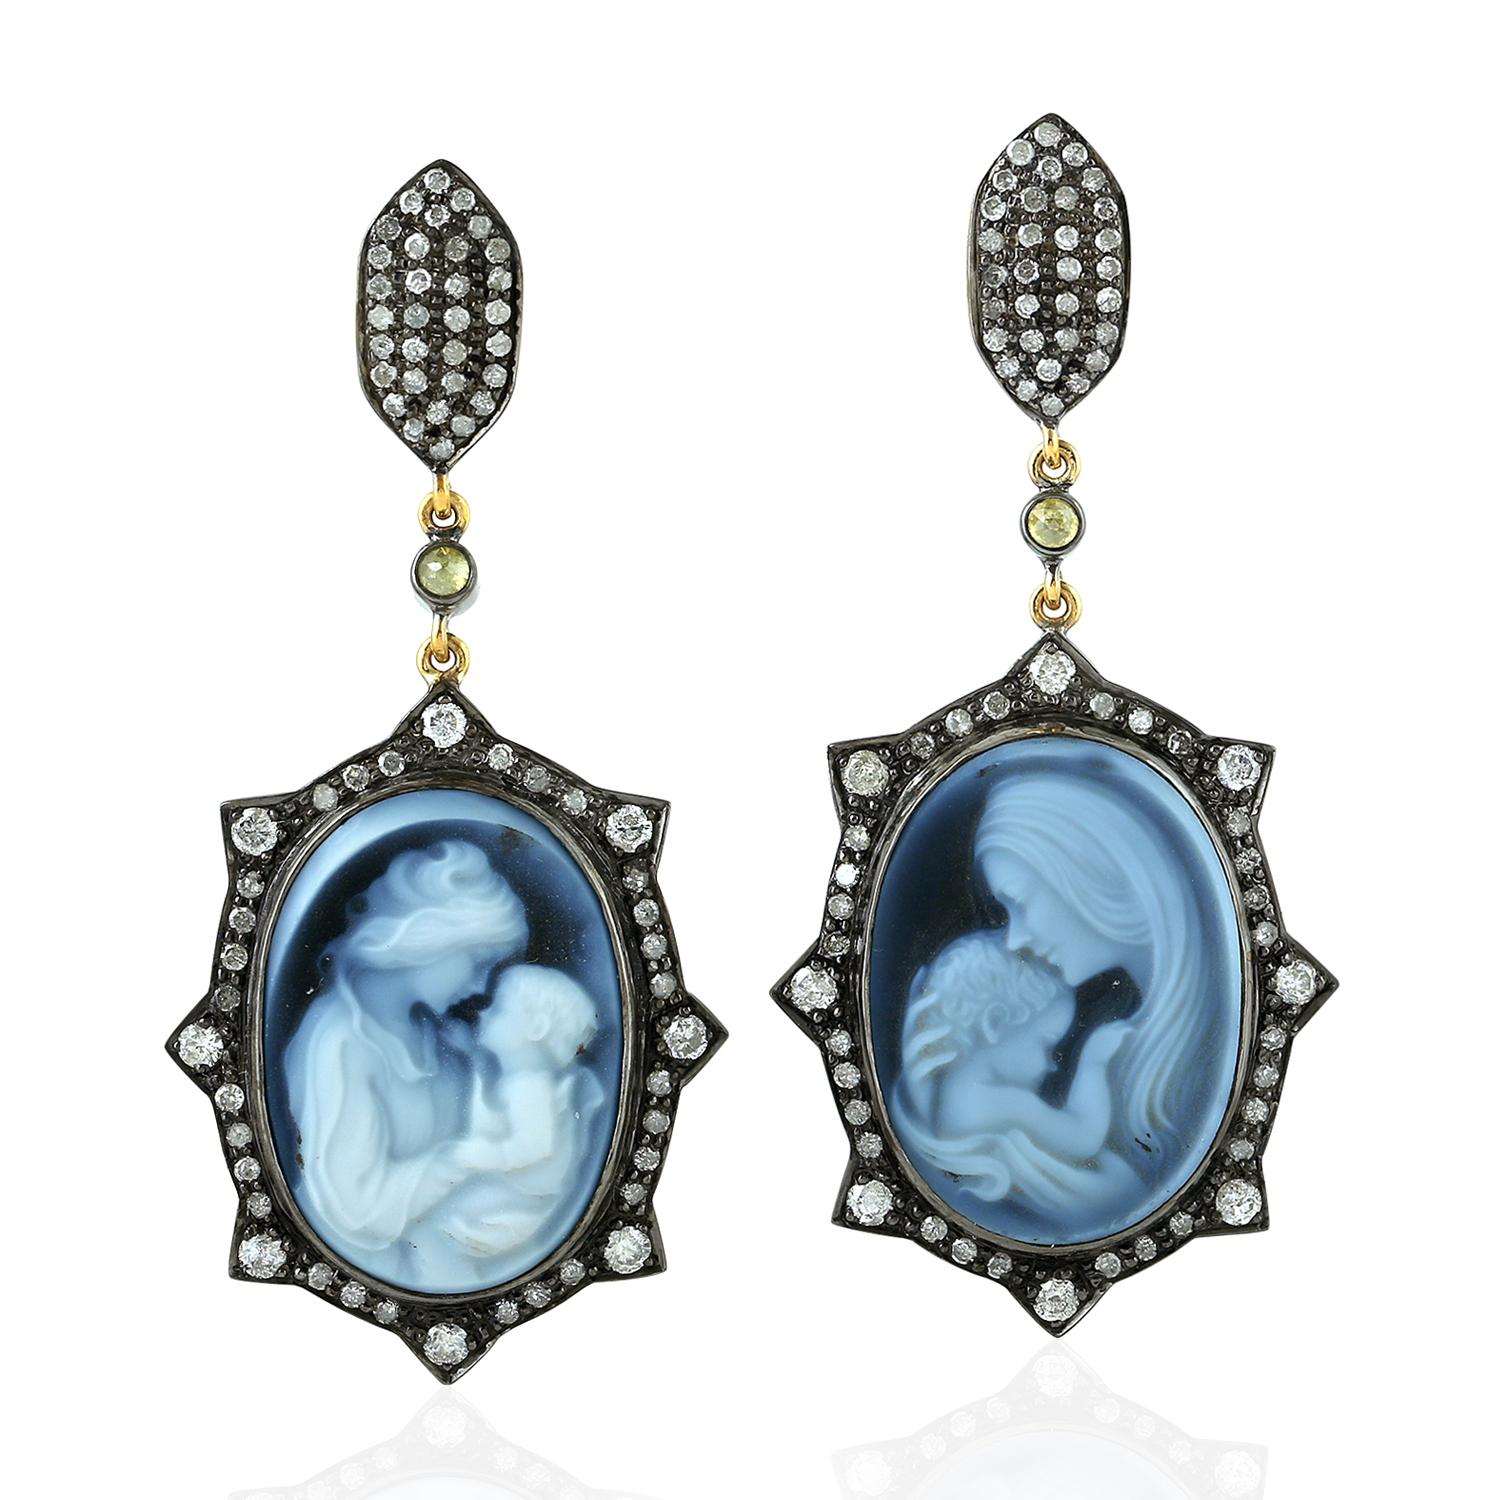 Mixed Cut Carved Agate Cameo Surrounded by Pave Diamonds Made in 18k Yellow Gold & Silver For Sale